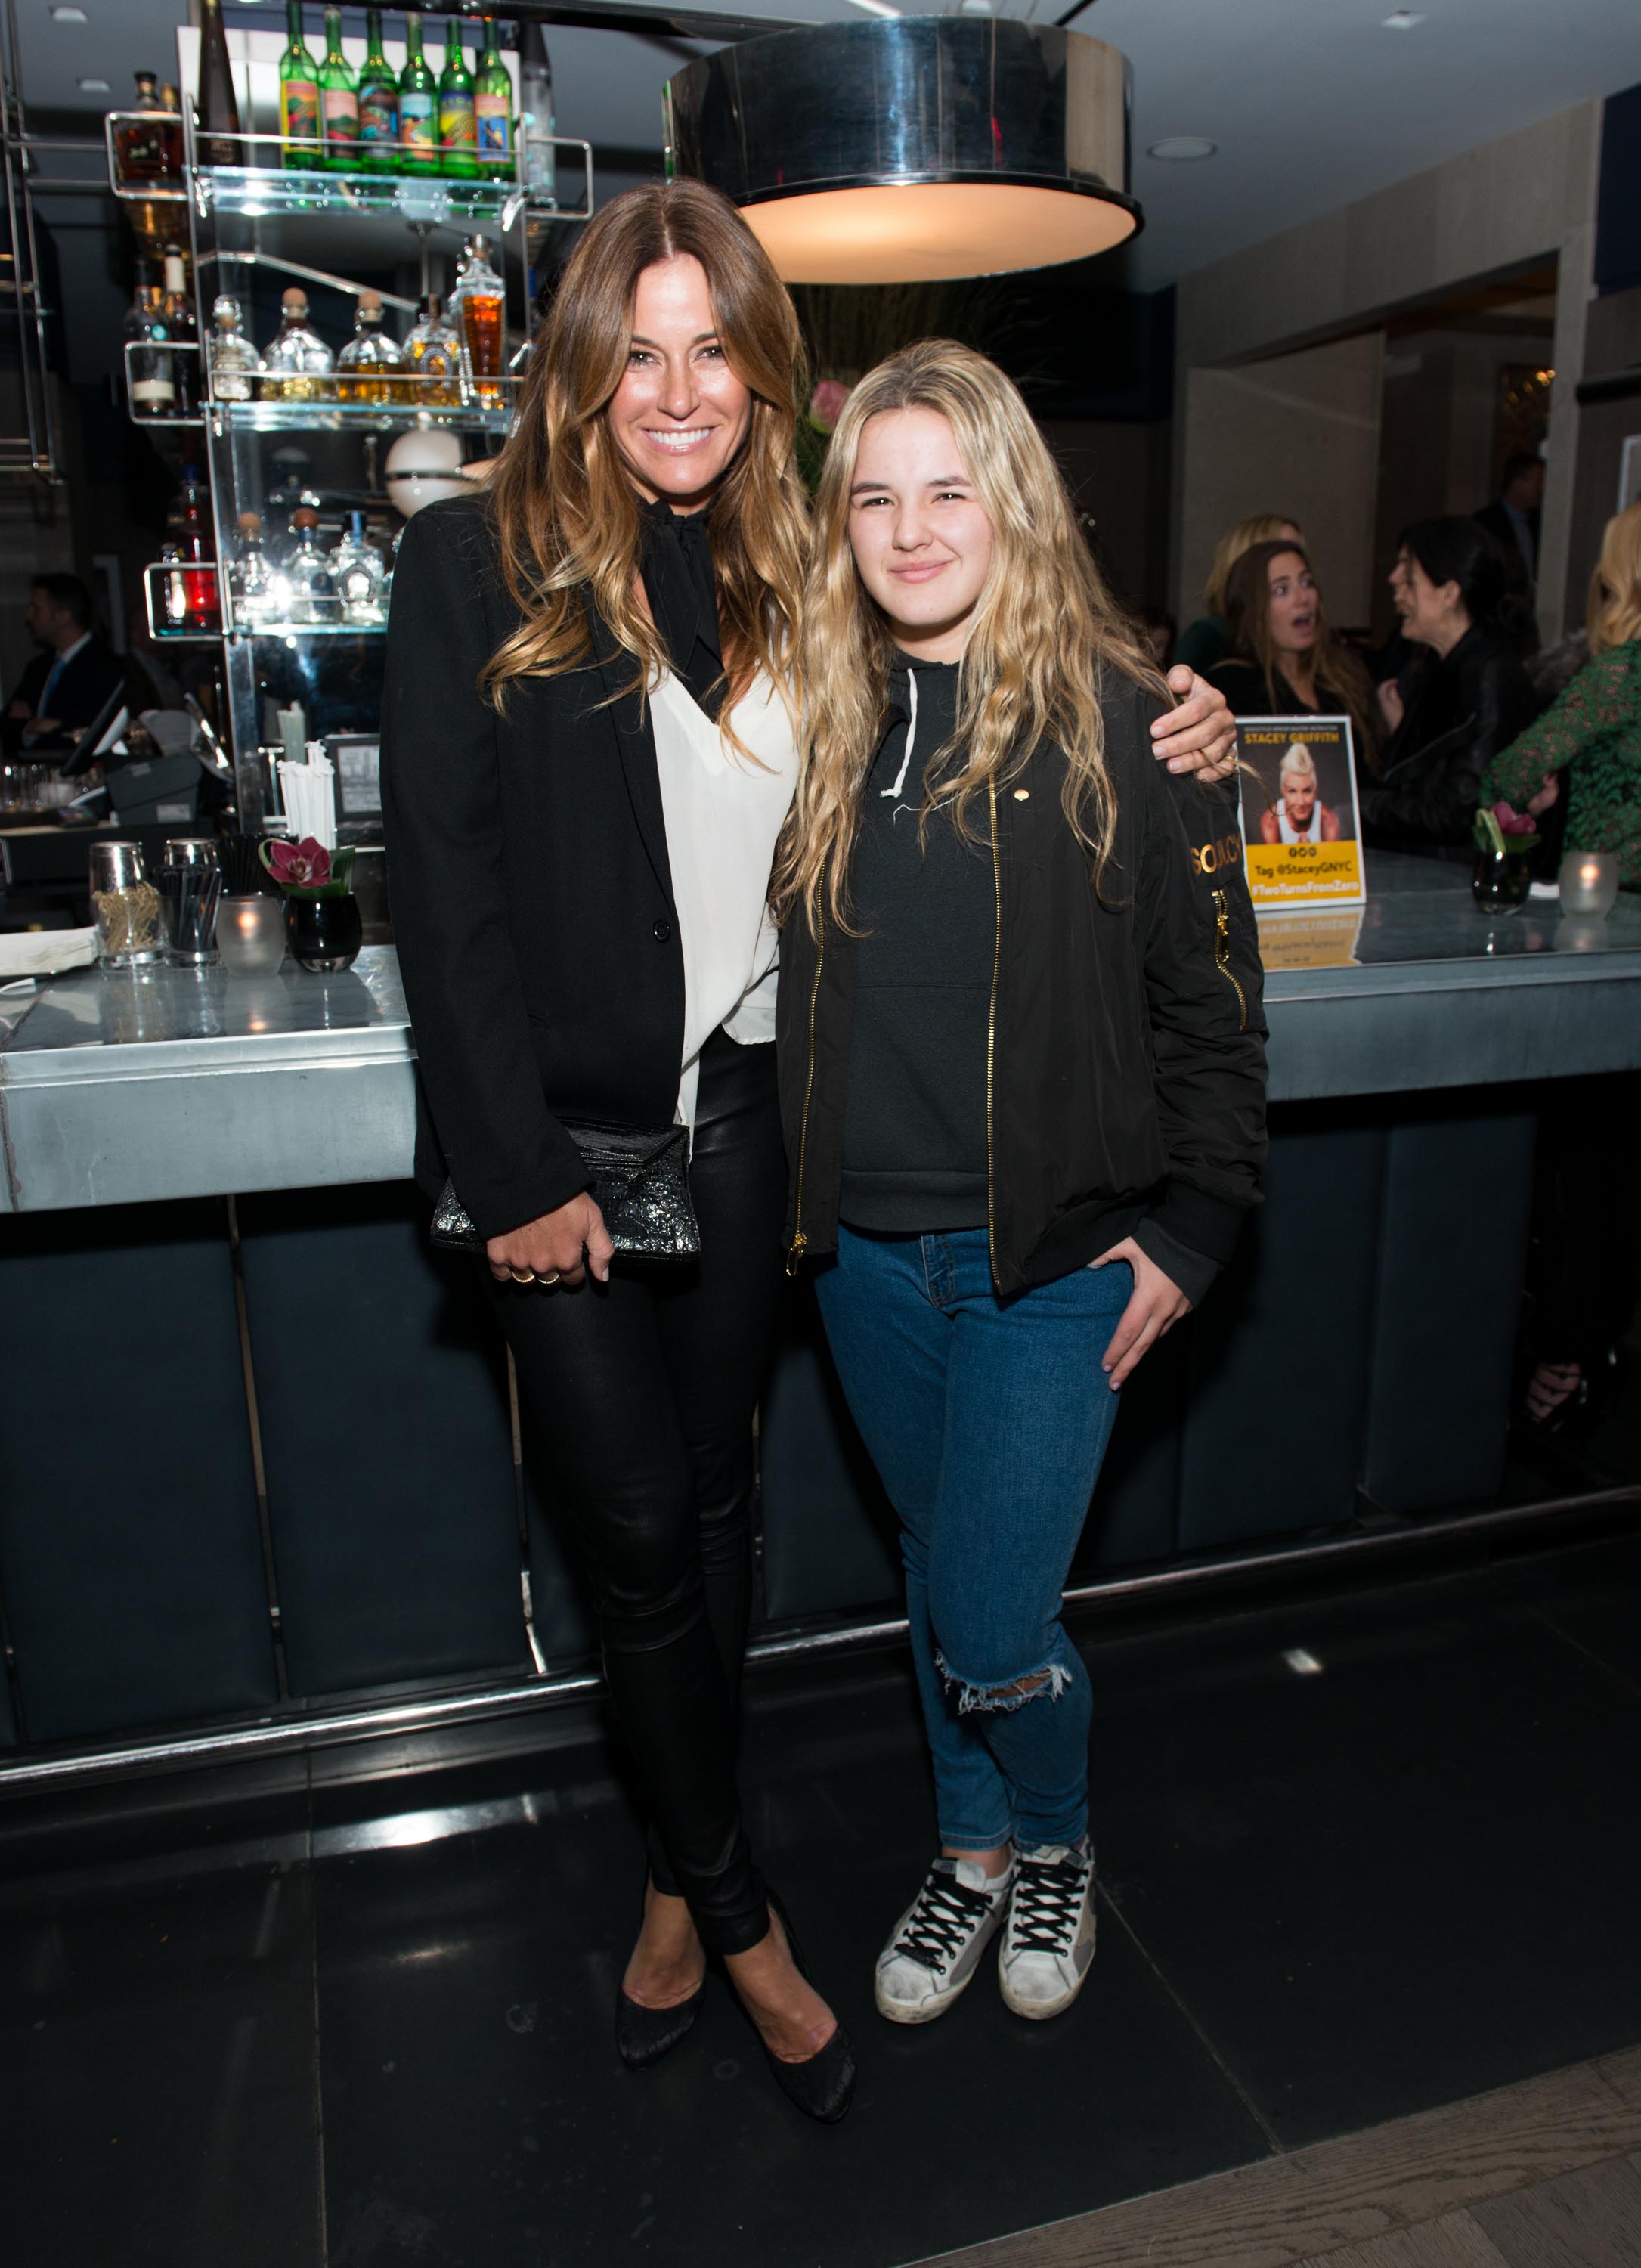 Kelly Killoren Bensimon attends the ‘Two Turns From Zero’ book launch event